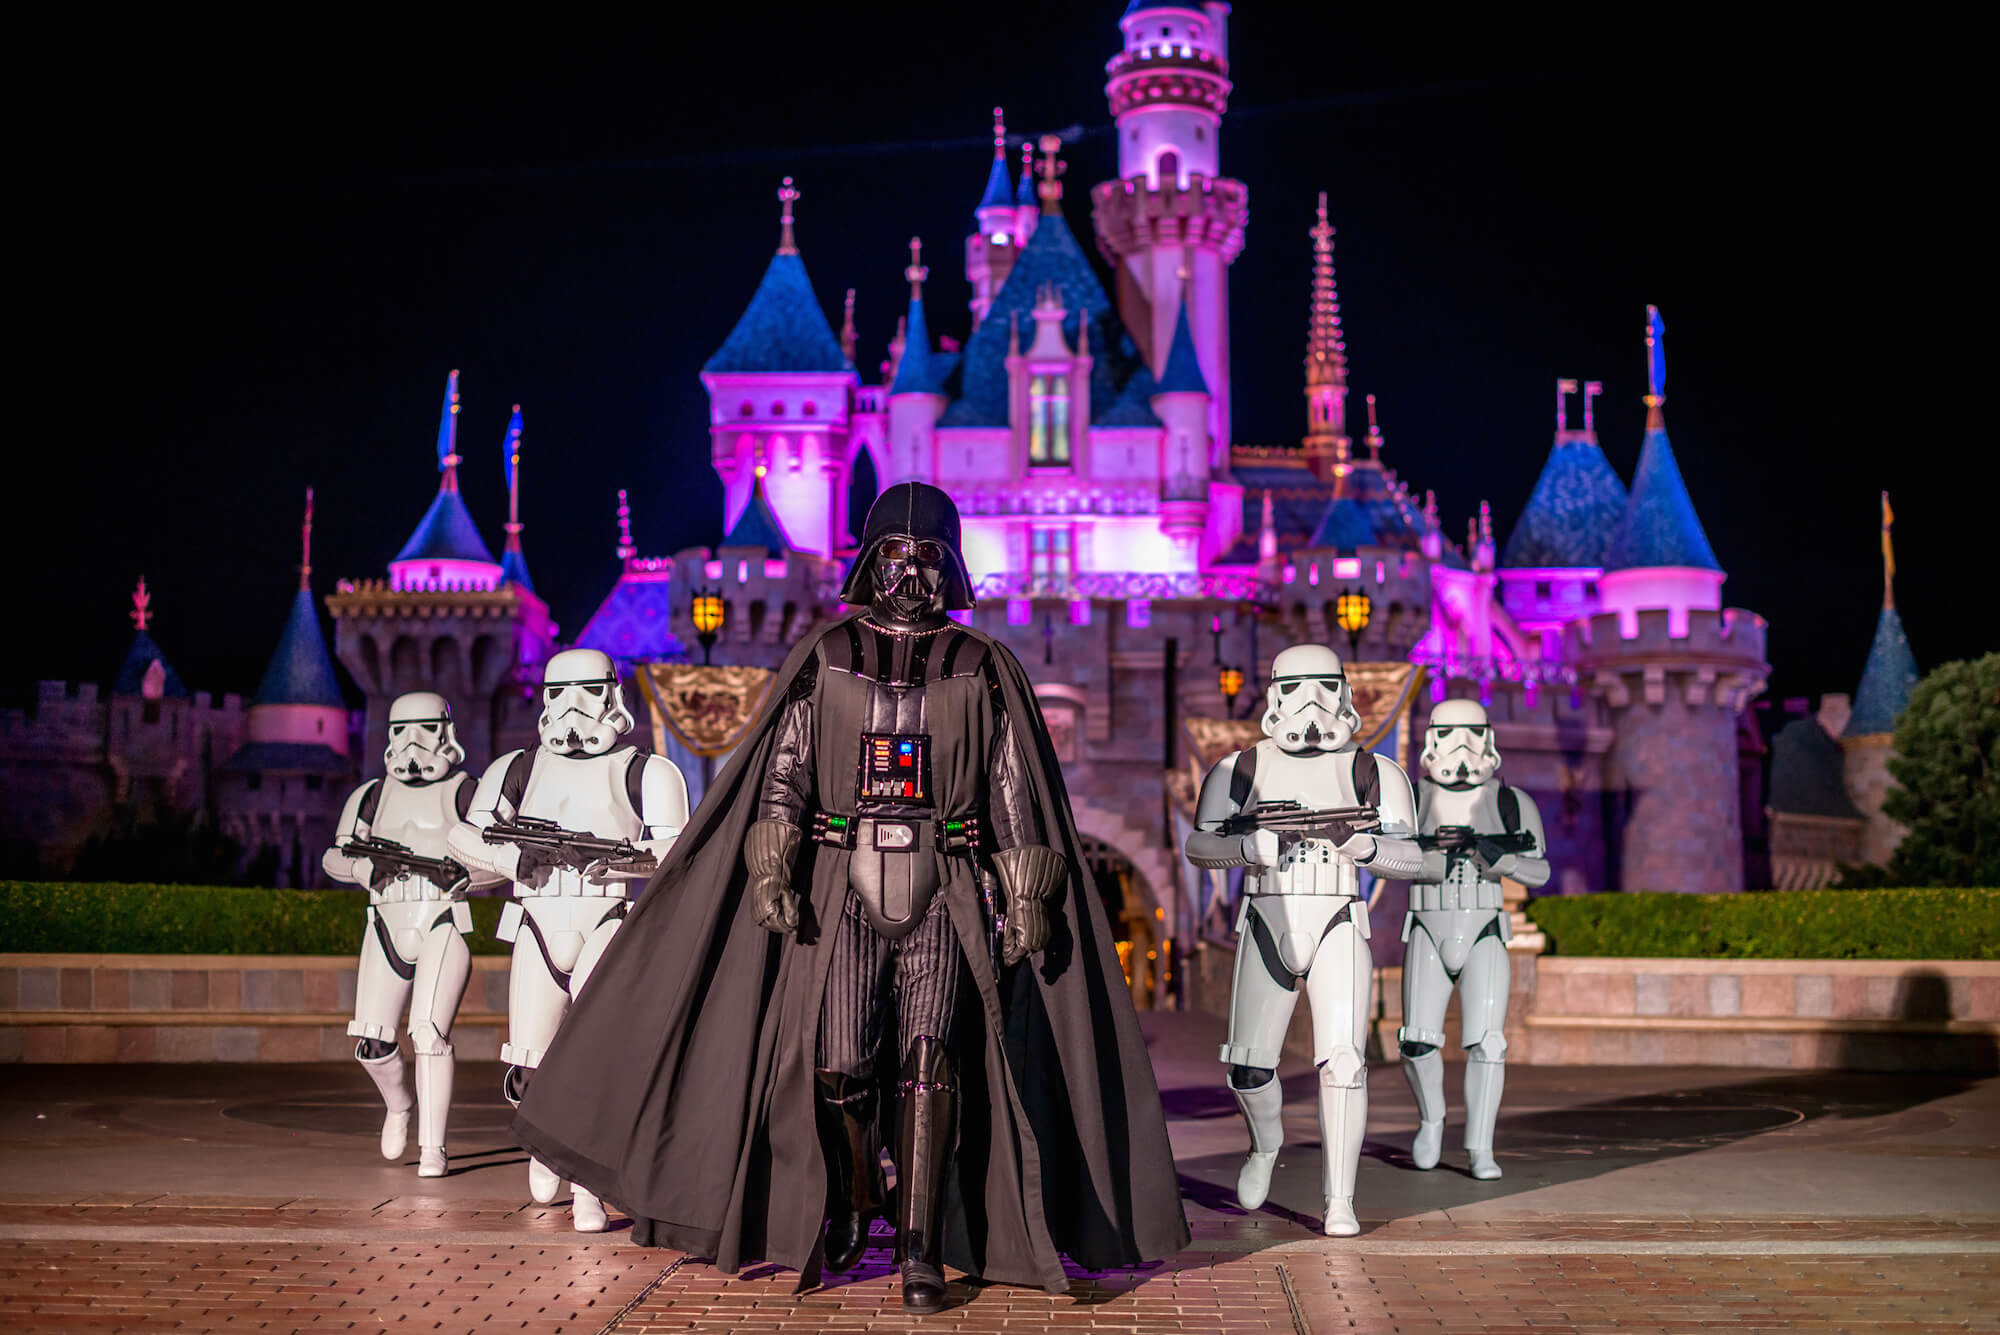 Name of Star Wars Disney Attraction Revealed